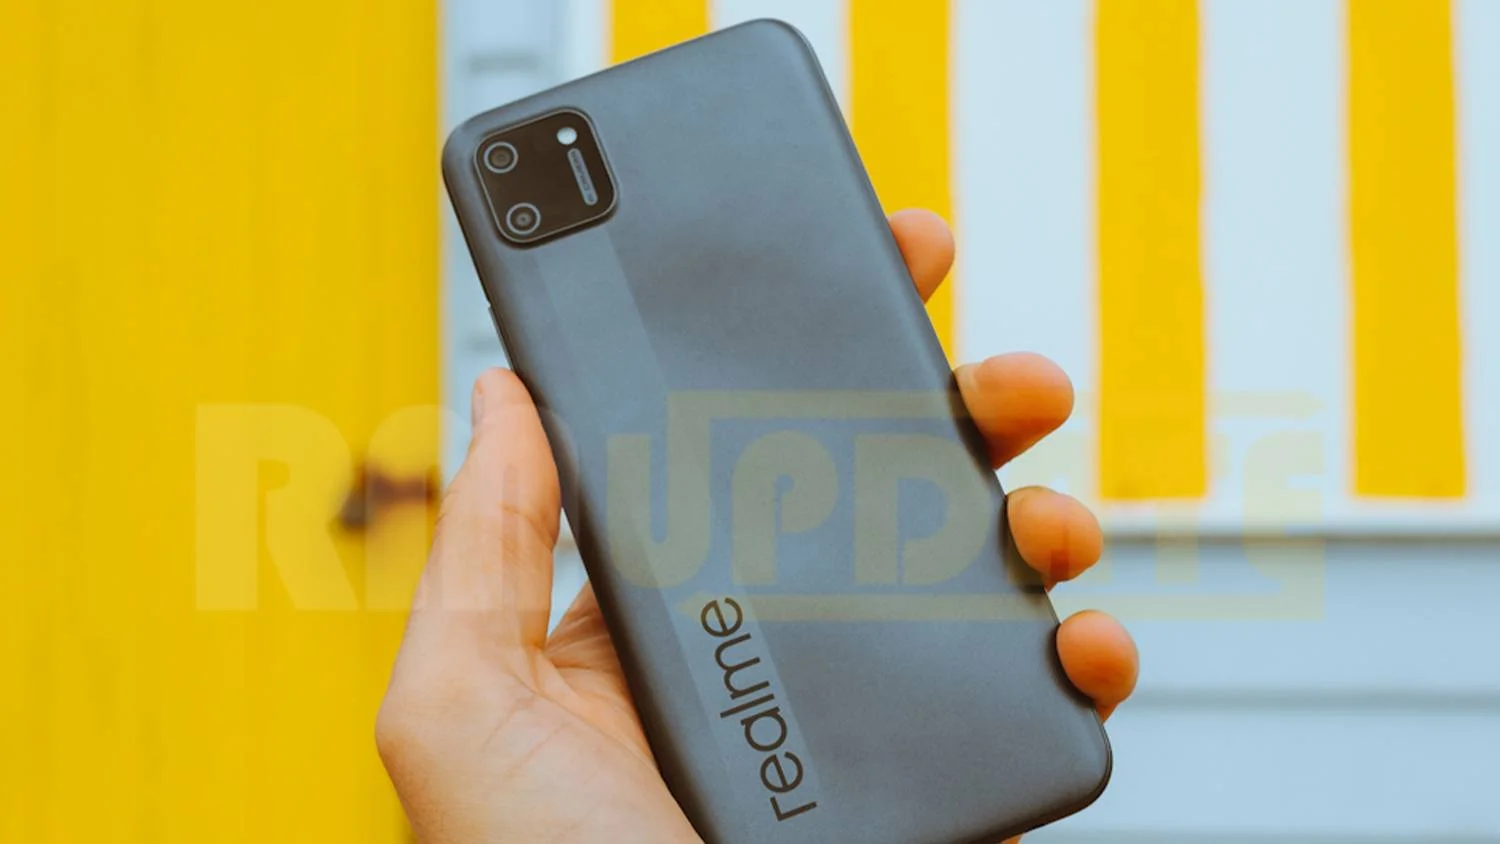 Realme rolls out February 2022 security updates on Realme UI for these devices